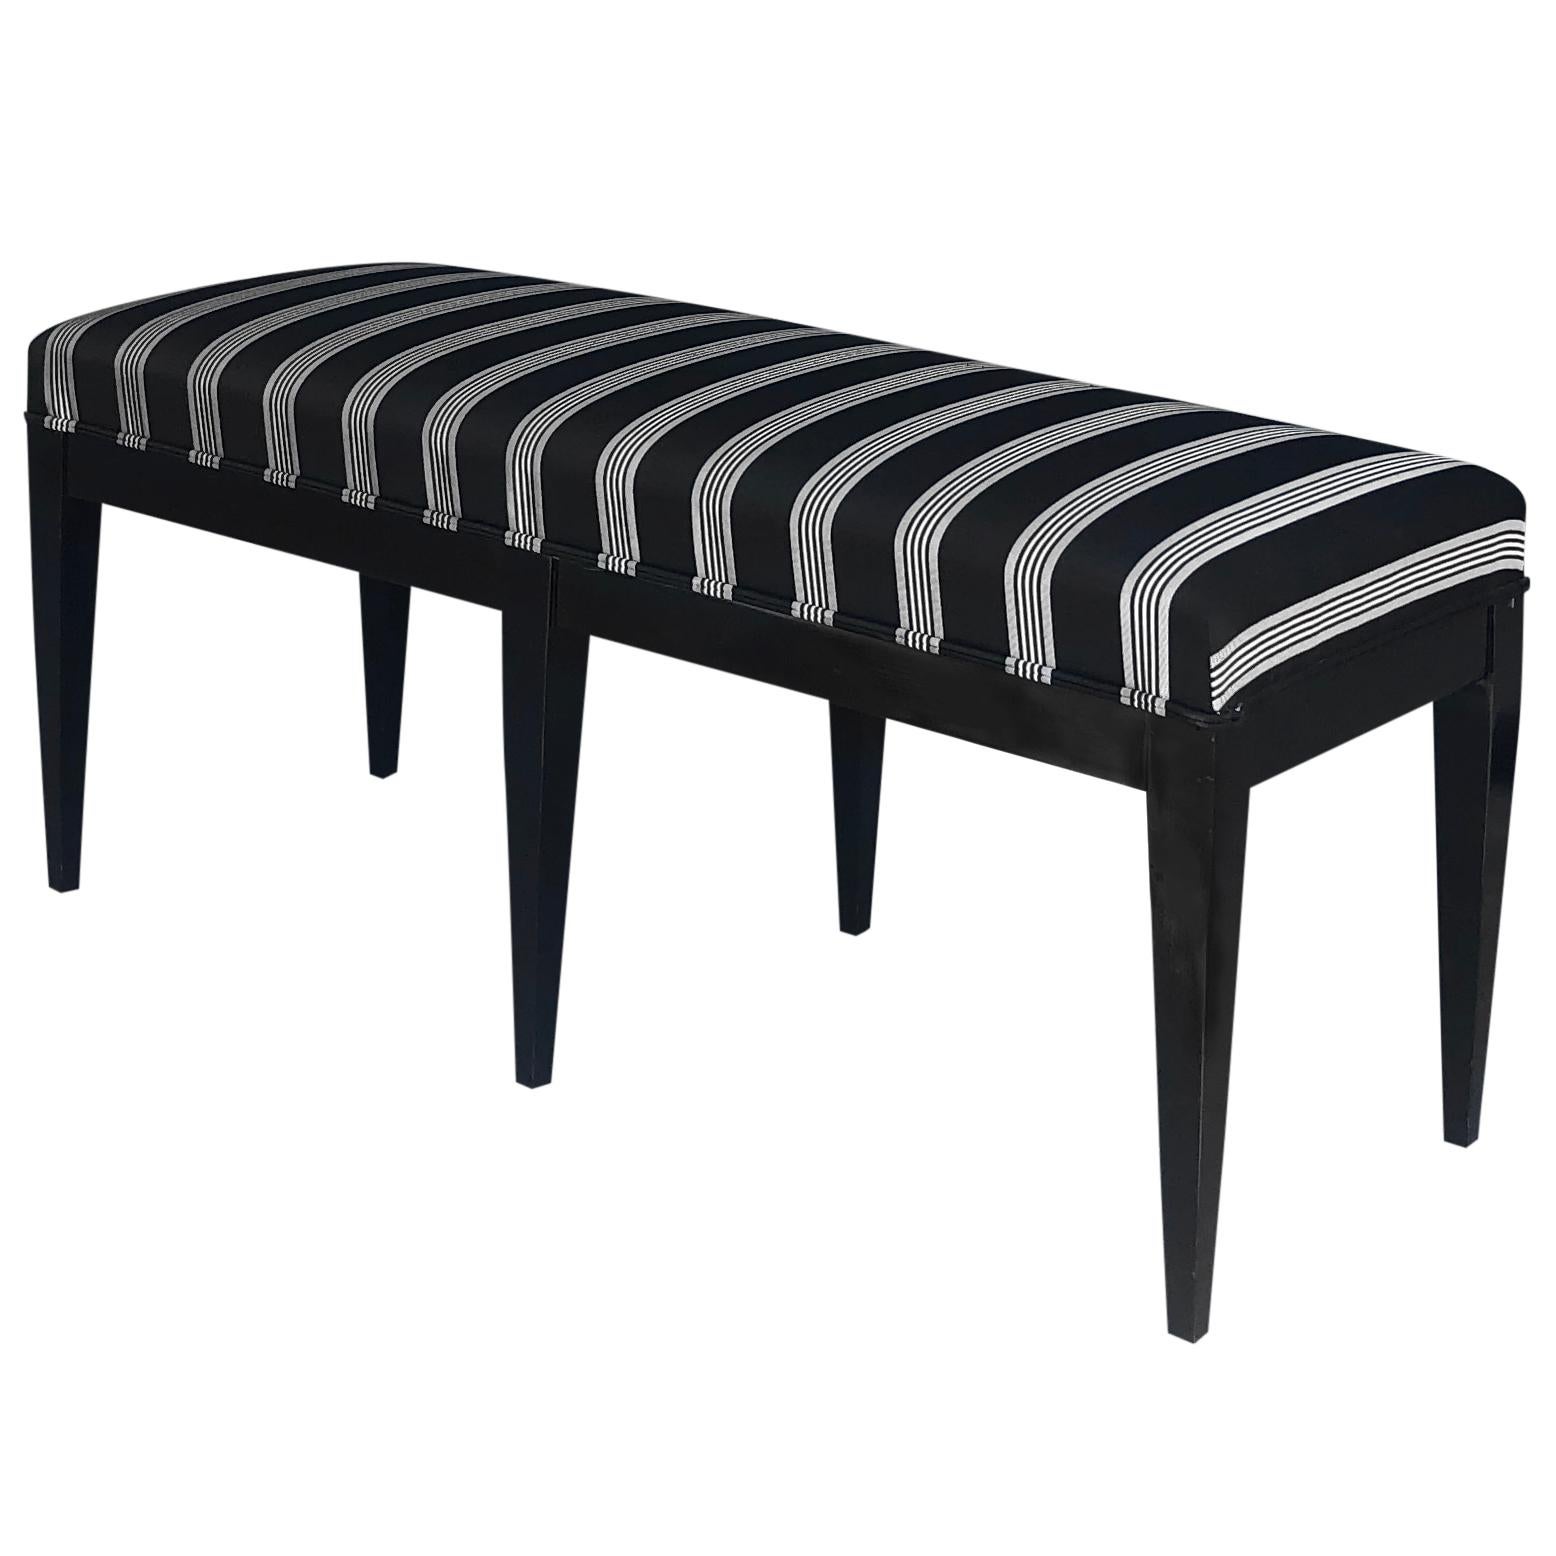 A vintage Mid-Century Modern Italian Neoclassical style ebonized bench made of hand crafted Giltwood, standing on six straight black wooden legs, in good condition. Newly upholstered in a black, white fabric. Wear consistent with age and use, circa